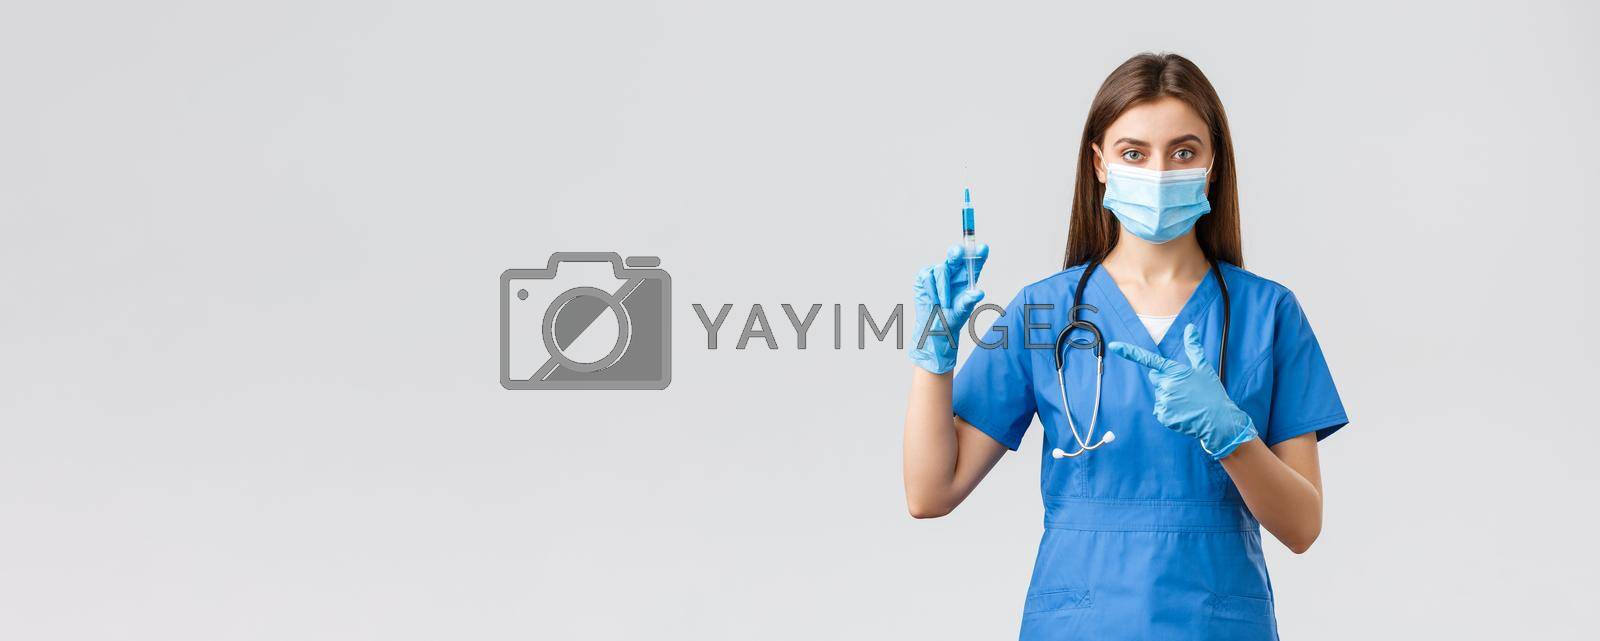 Covid-19, preventing virus, health, healthcare workers and quarantine concept. Serious female nurse or doctor in blue scrubs, medical mask, pointing at syringe with coronavirus vaccine.